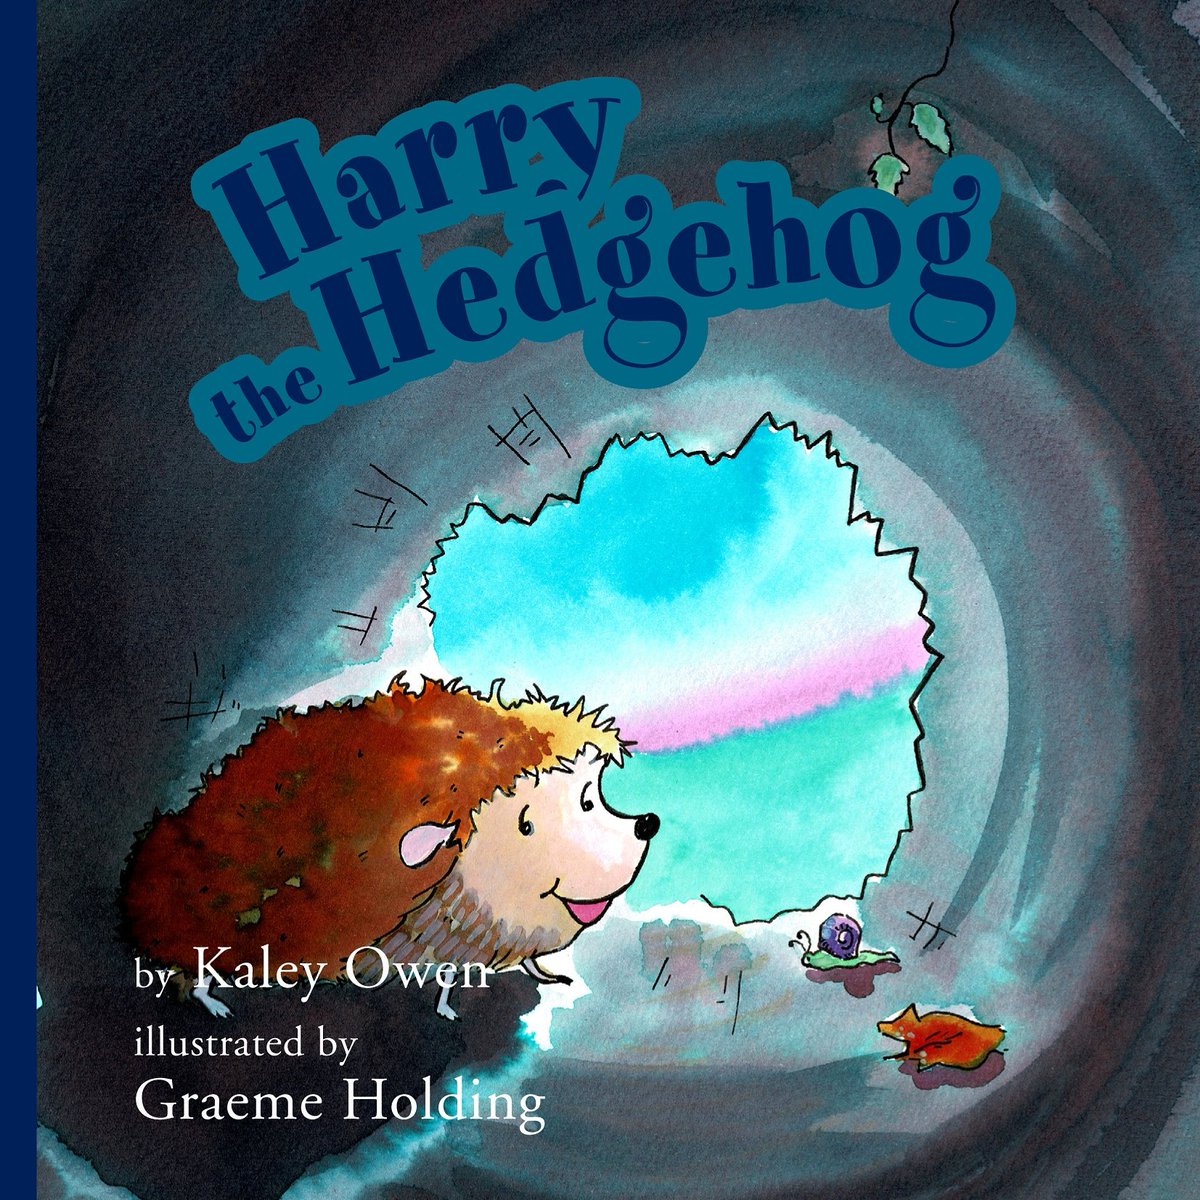 This is Harry the Hedgehog, Harry is afraid of the dark! Catch up on the animal alphabet series... Online at Water stones and Amazon.

#childrensbooks #kidslit #childrensbookclub #parents #schoollibrary #readingbooks #illustrator #artist #illustration